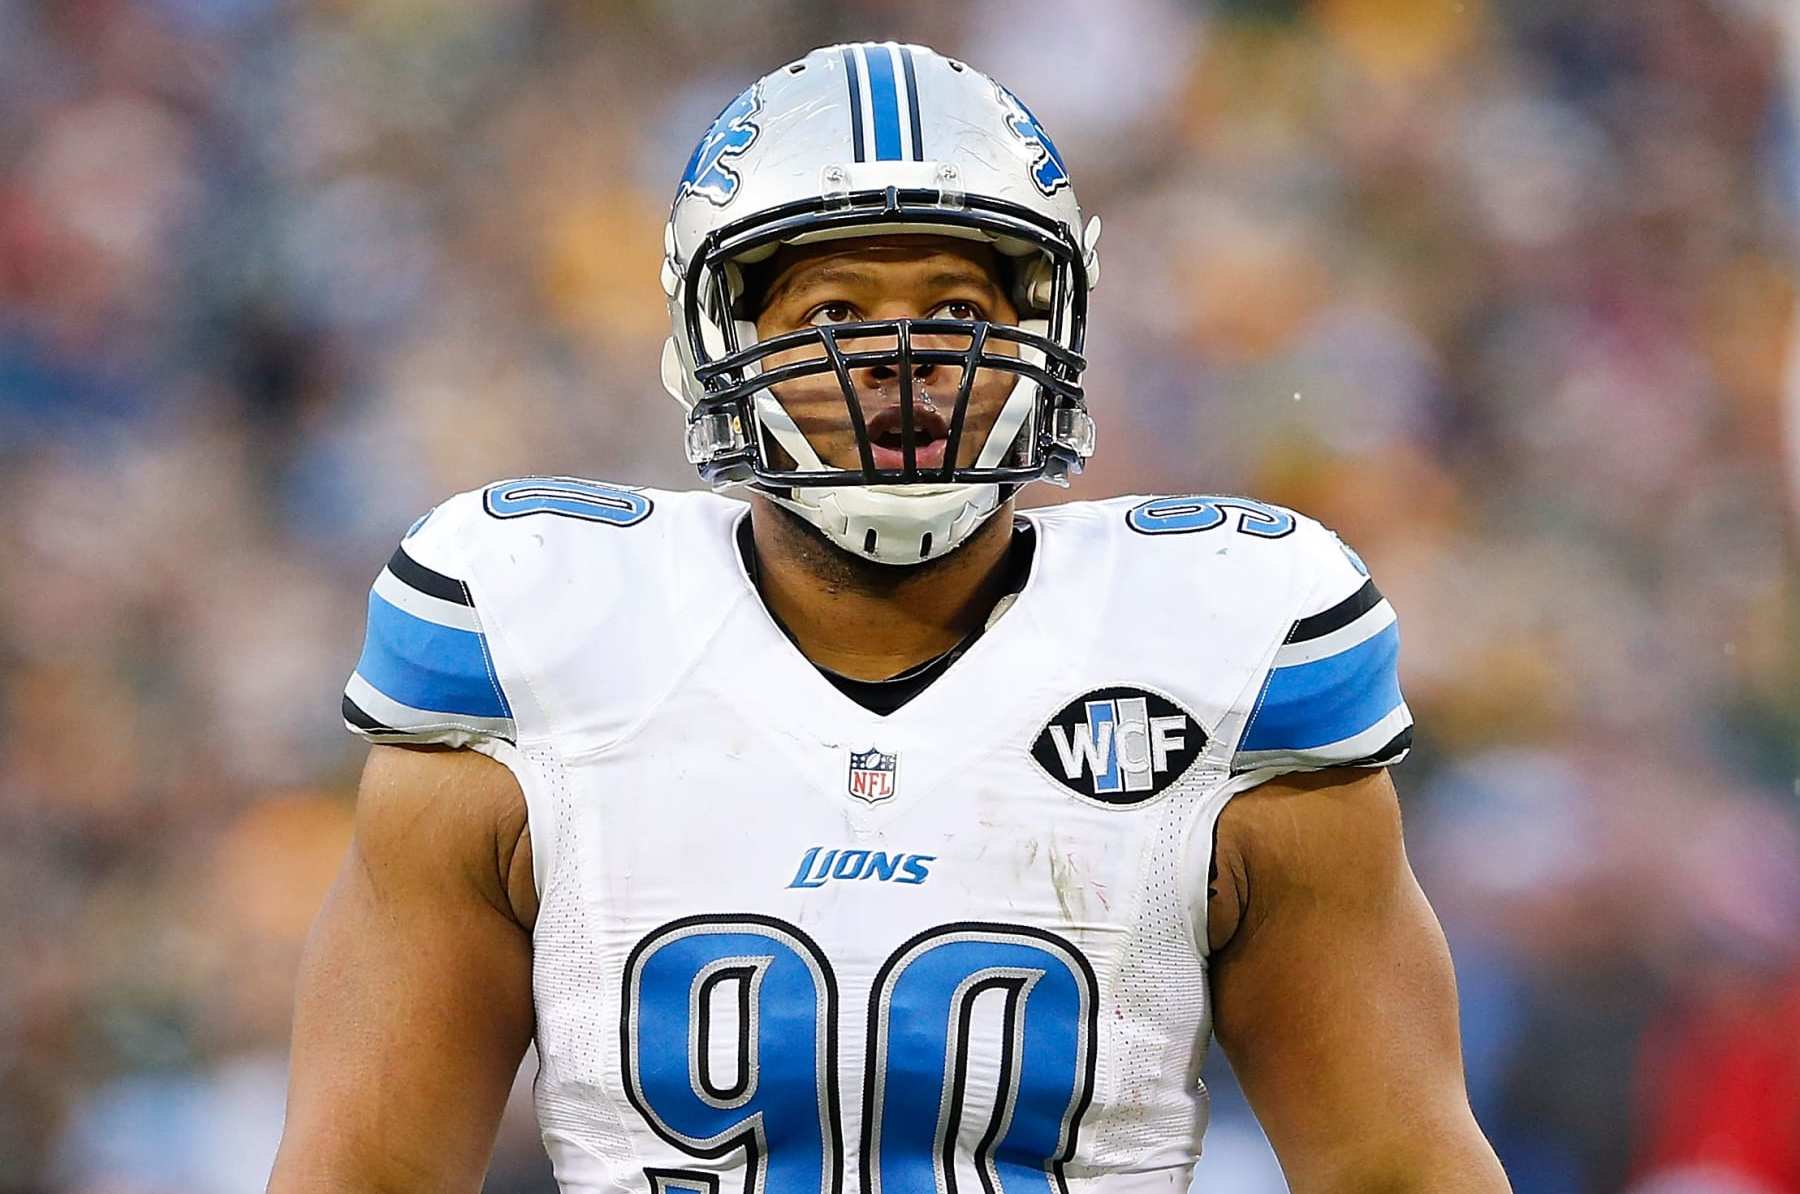 Former Lion Ndamukong Suh still available for easily expected reason